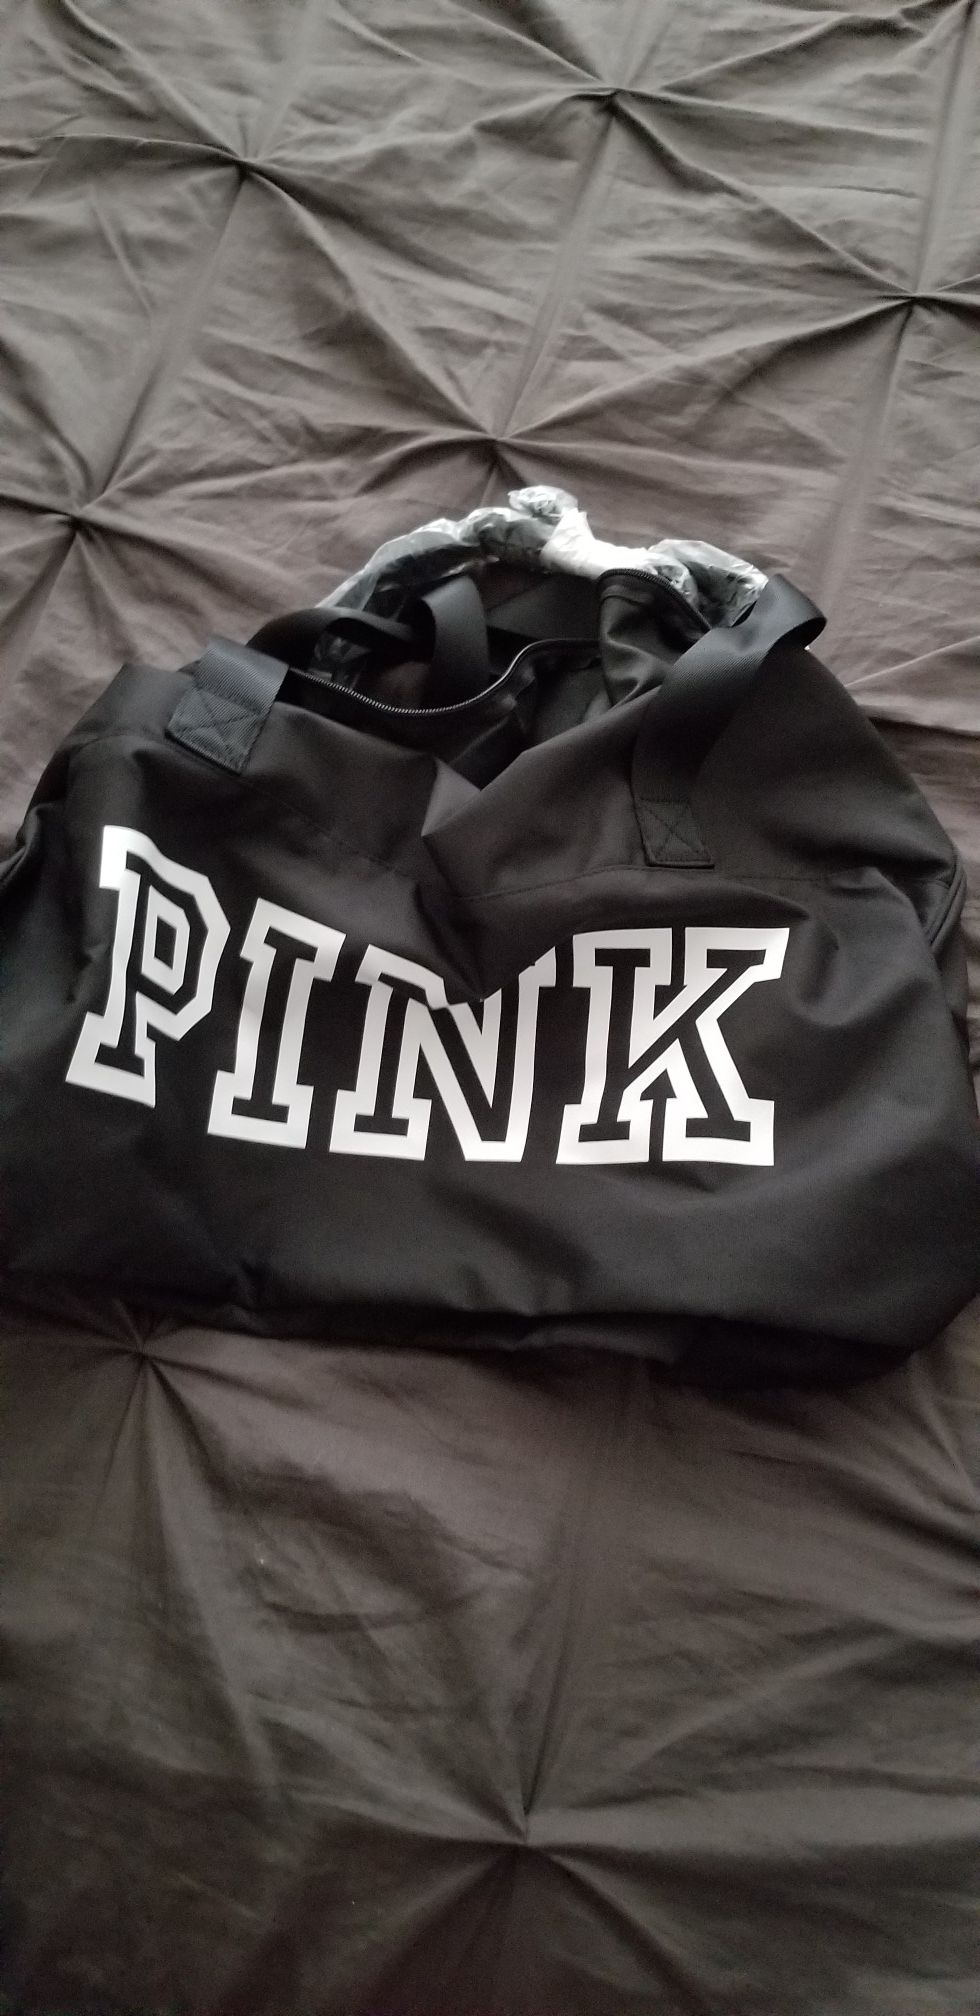 Vs Pink duffle bag with water bottle black firm price.